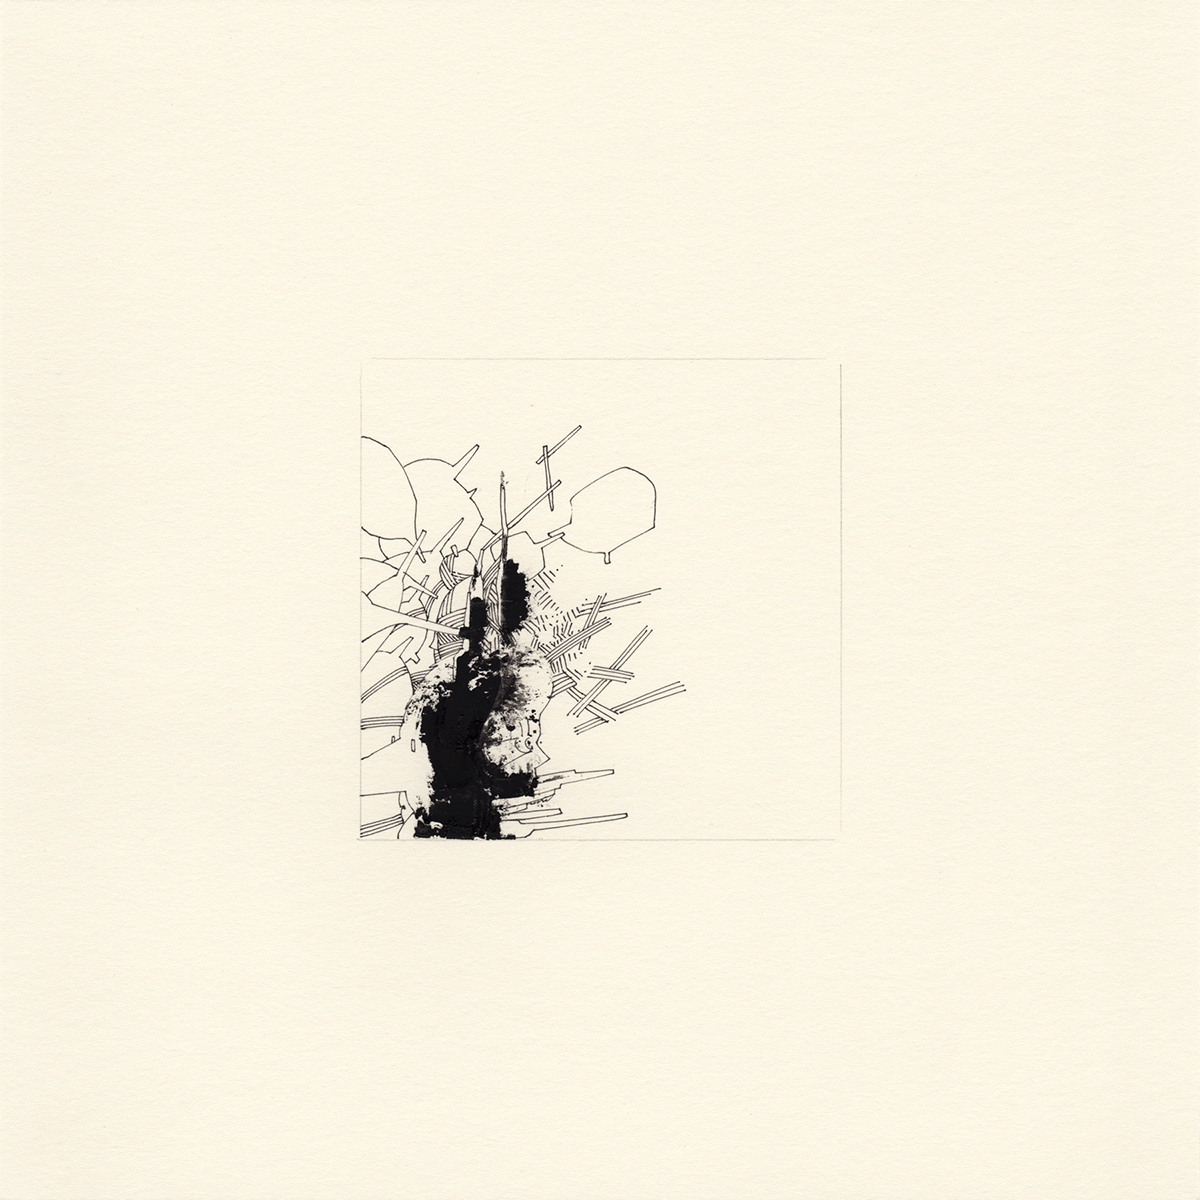 10BY10 Collaboration line drawing abstract kaeghoro art tumblr robert malte engelsmann figurative ink paper